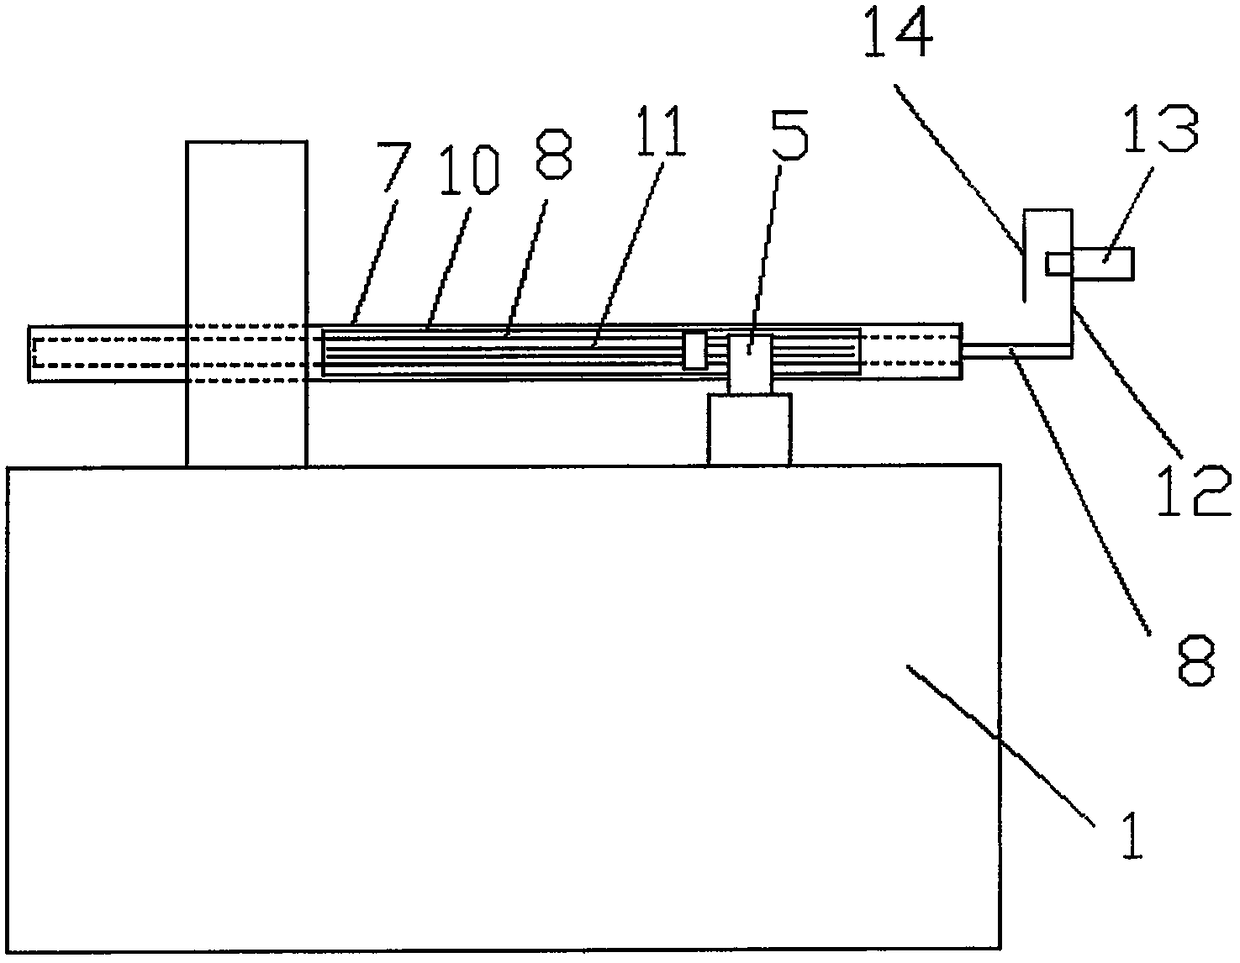 An automatic cutting device for server cabinet frame support rods